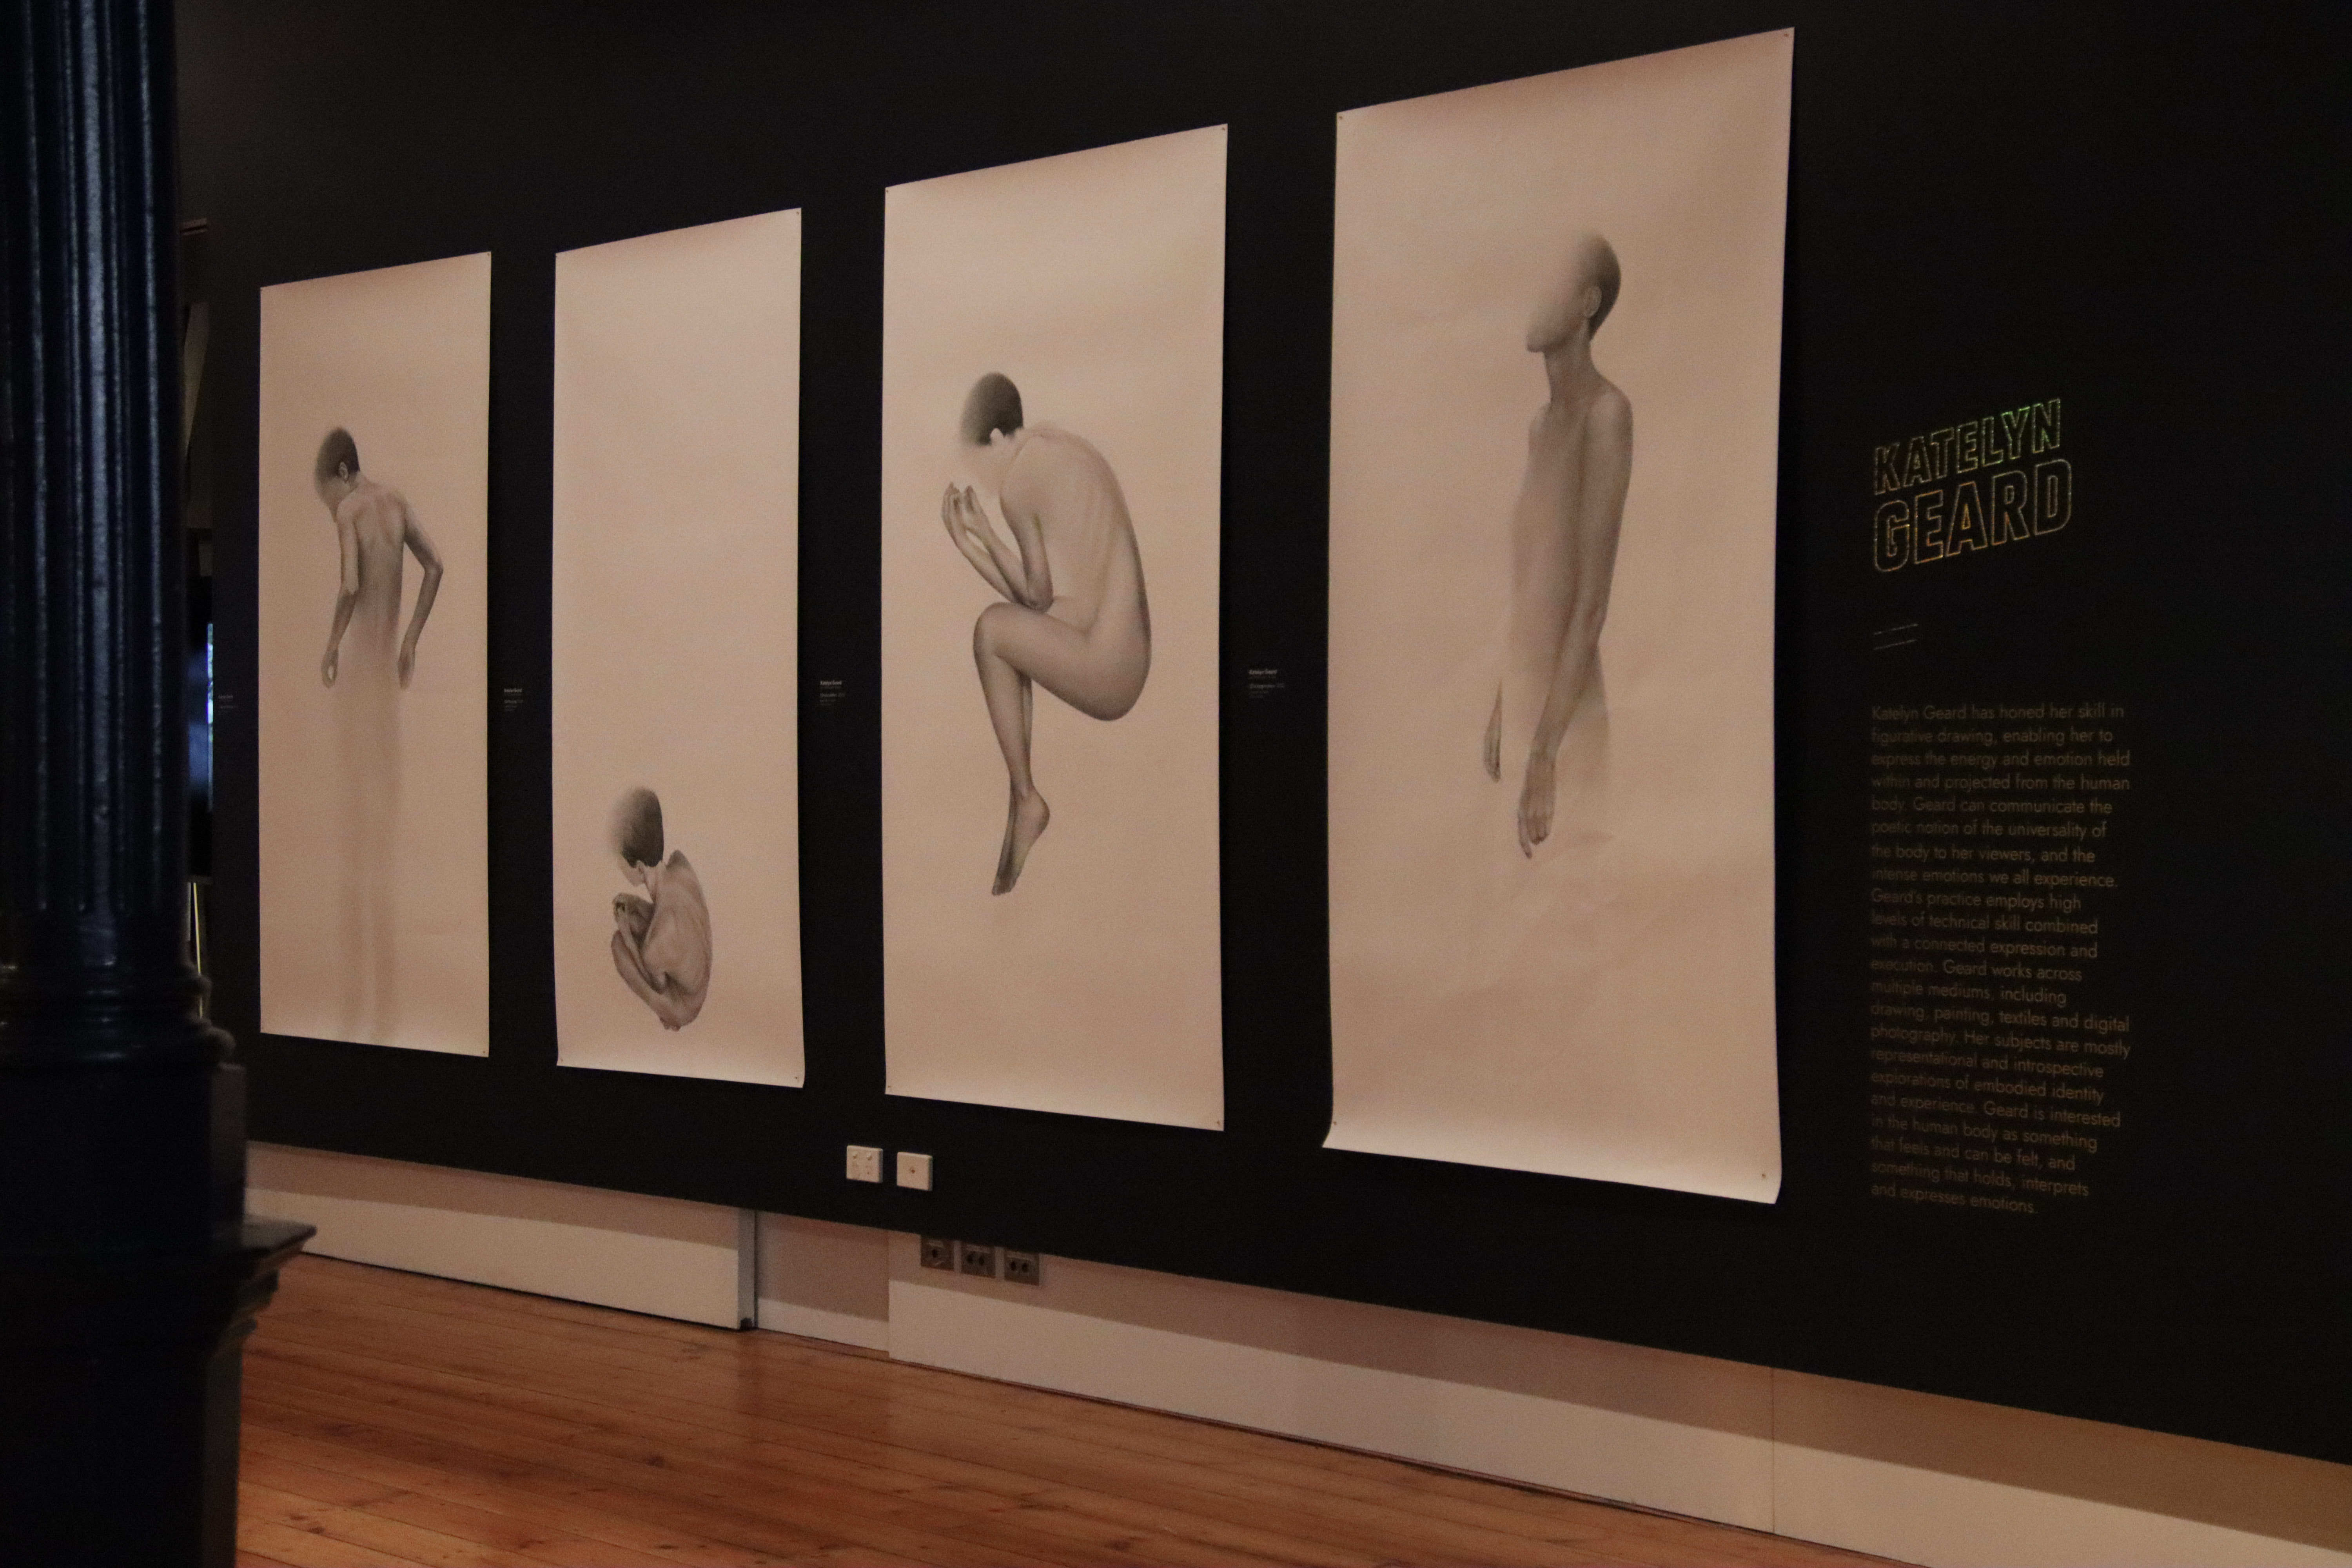 Large format sketches of the human form by Tasmanian artist Katelyn Geard 